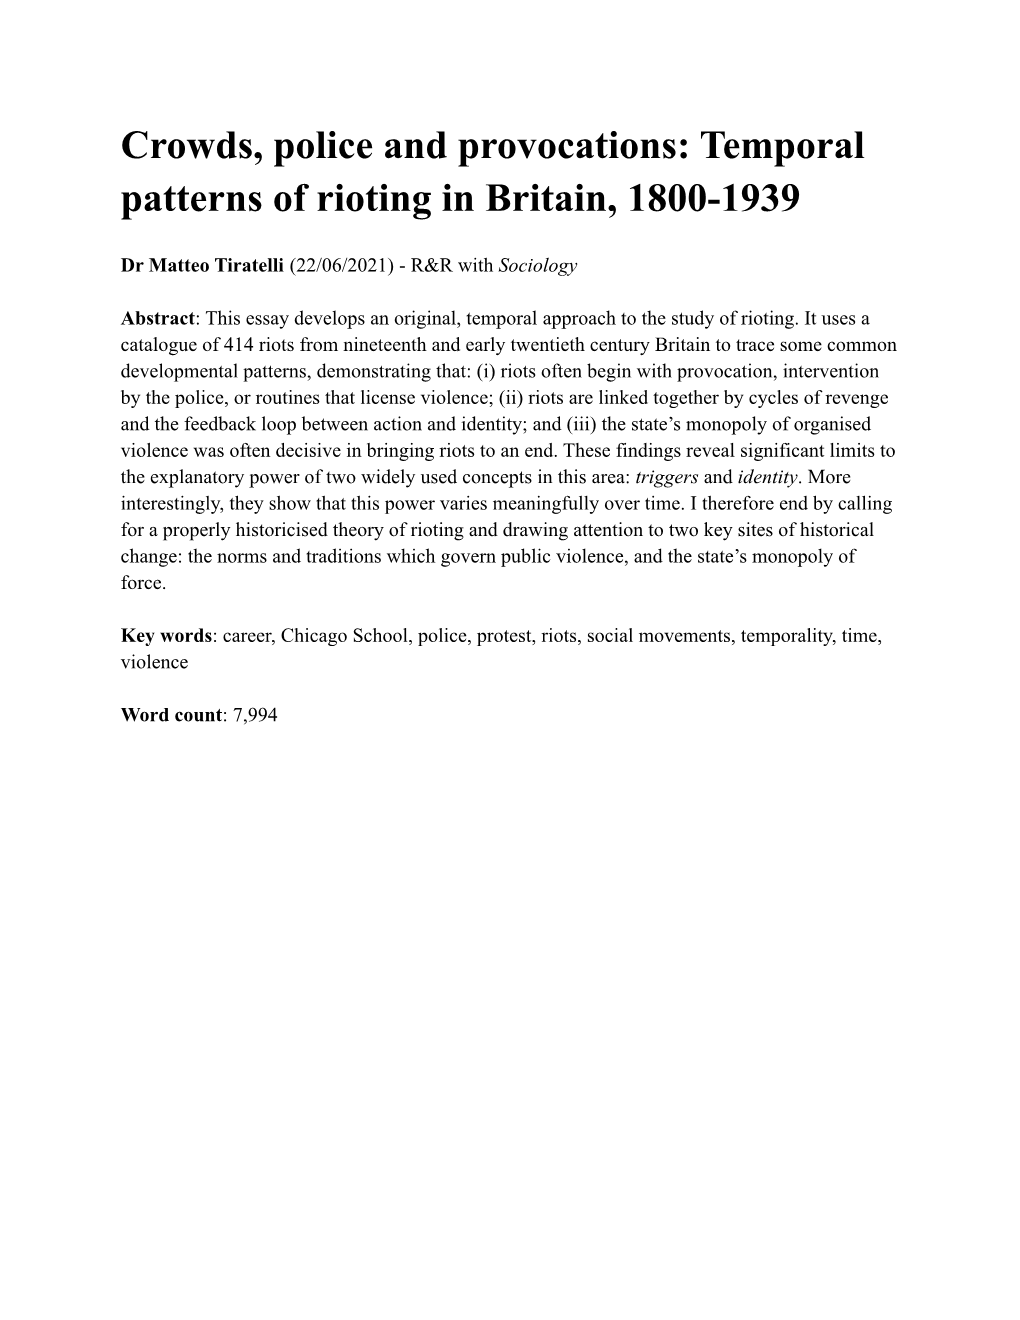 Crowds, Police and Provocations: Temporal Patterns of Rioting in Britain, 1800-1939